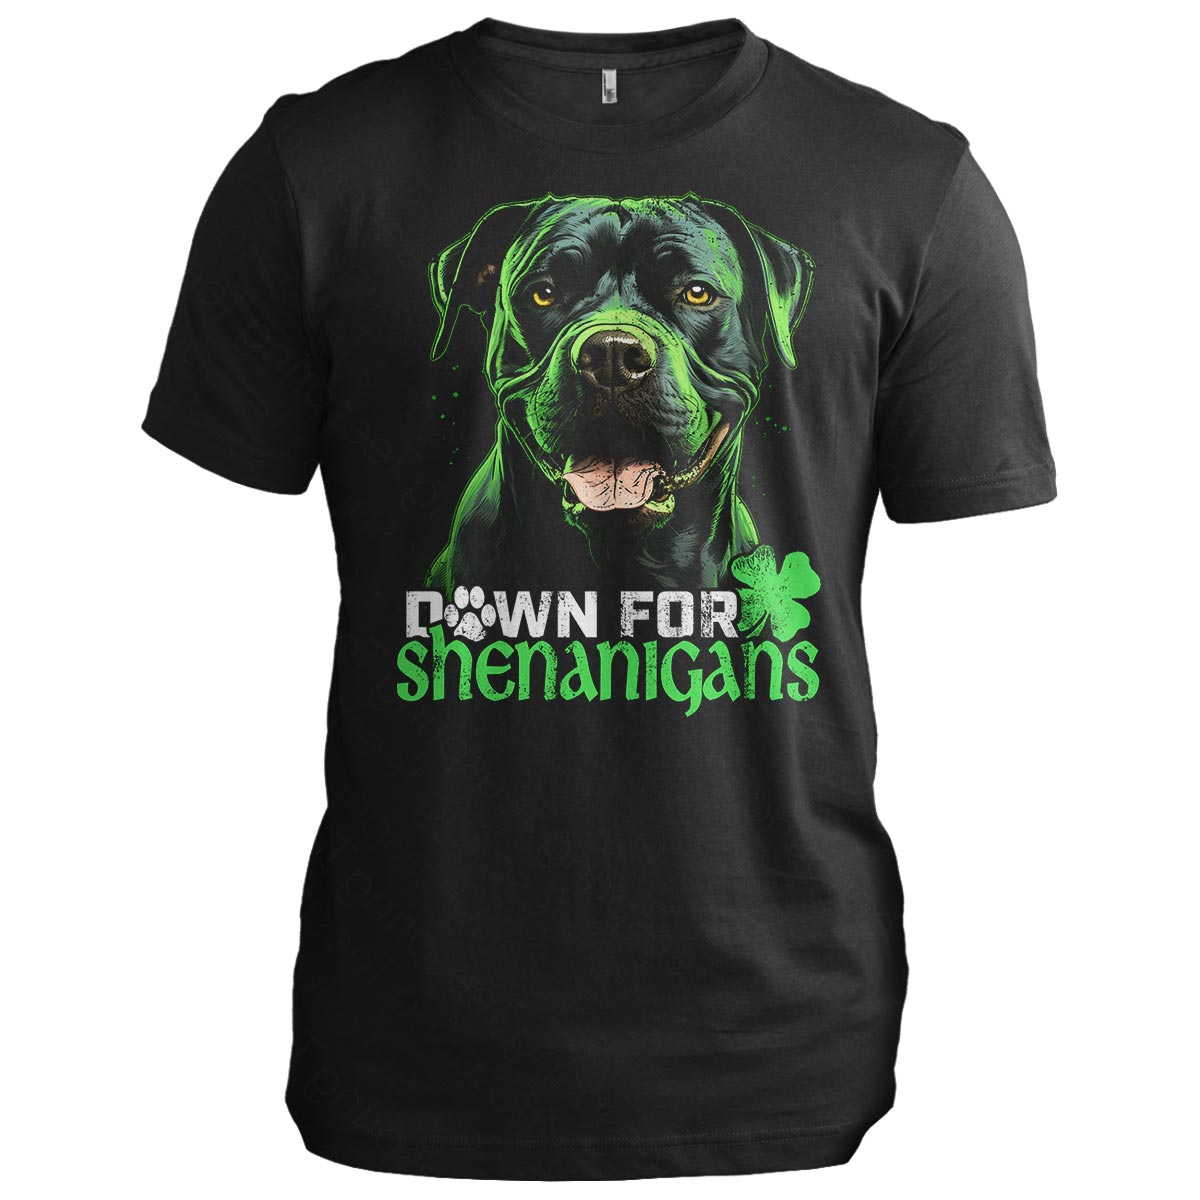 Down for Shenanigans: Cane Corso